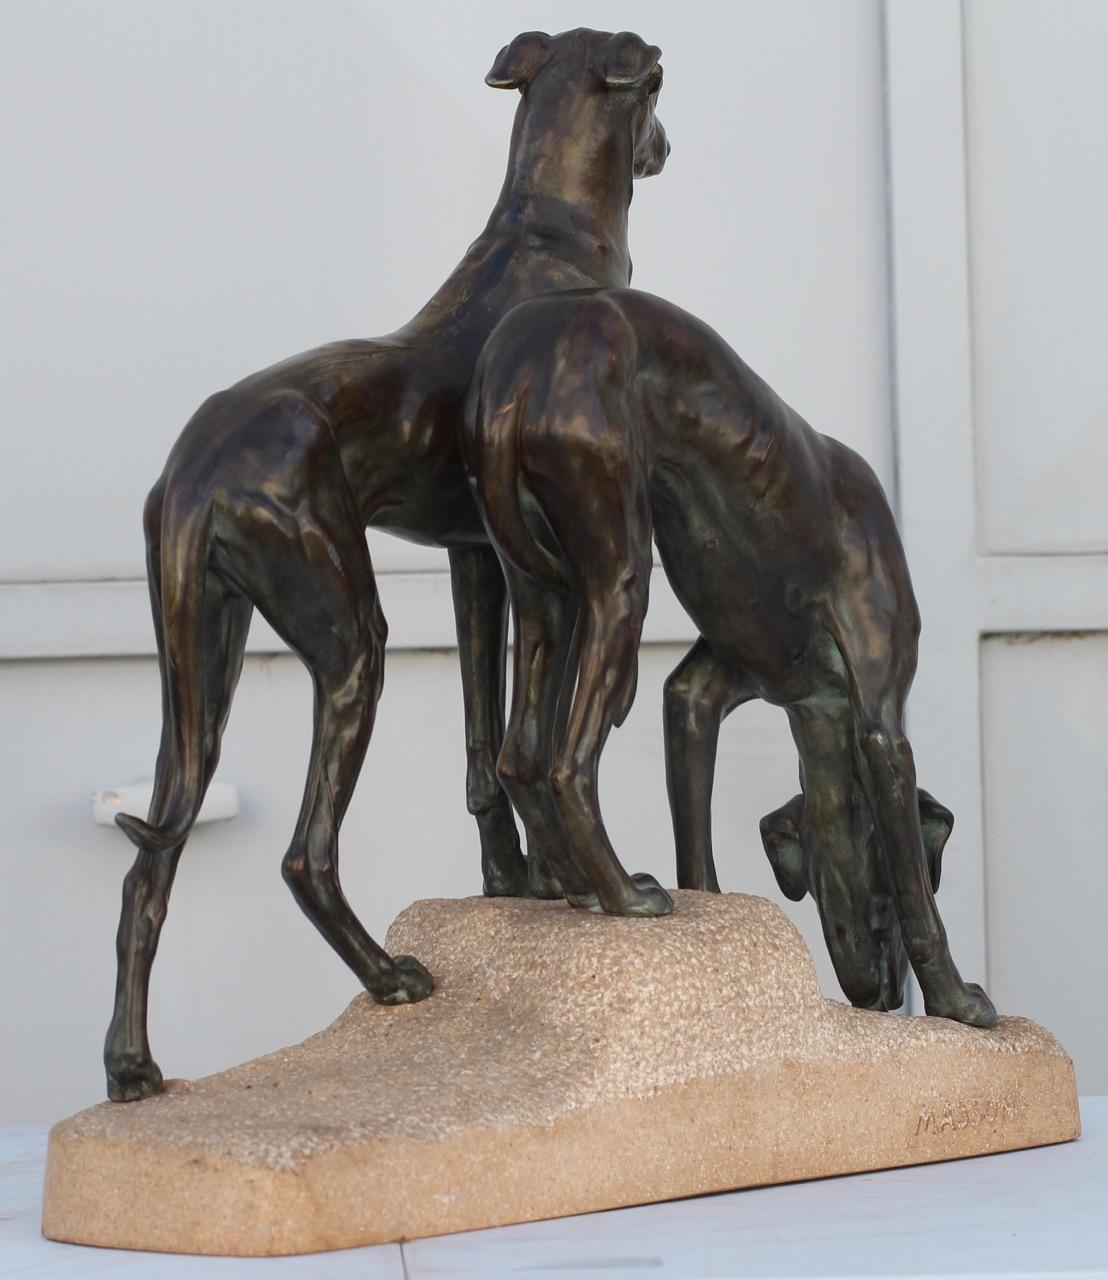 Early 20th Century Art Deco Sculpture Greyhounds by Jules Edmond Masson for Max Le Verrier, France